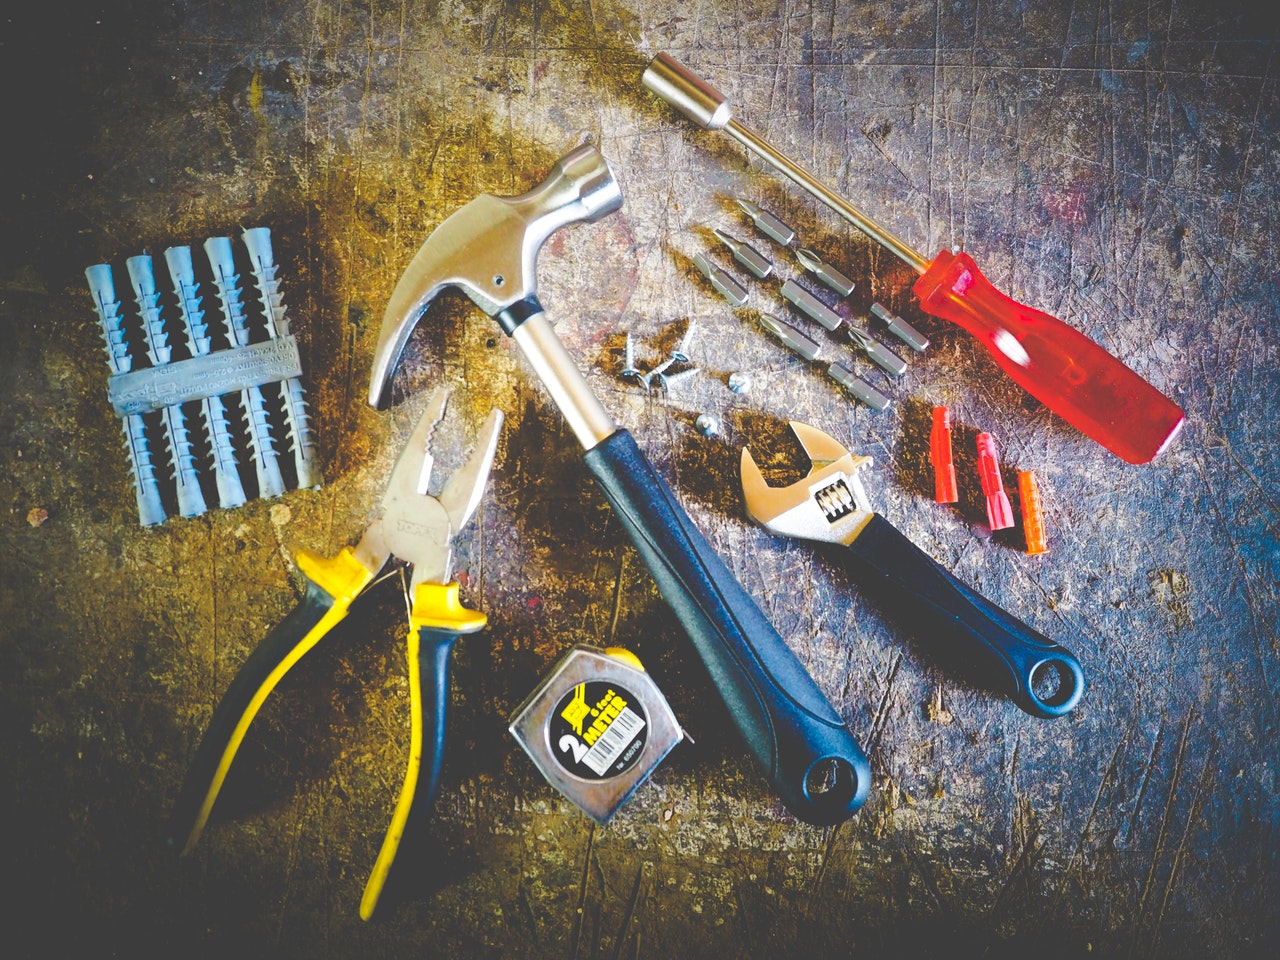 How To Find The Top Tools For Your Workshop